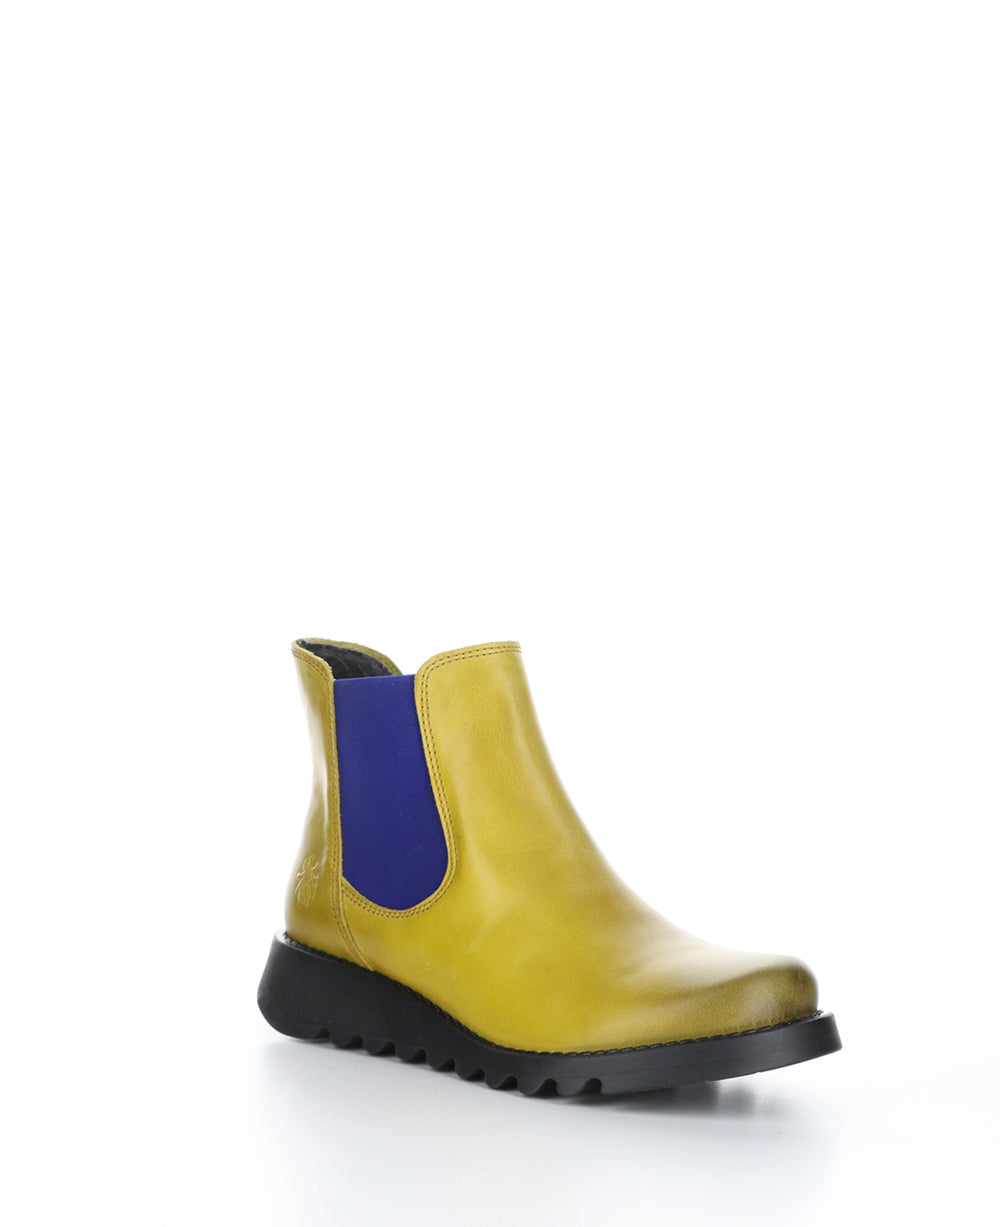 SALV Mustard Round Toe Ankle Boots|SALV Bottines à Bout Rond in Jaune